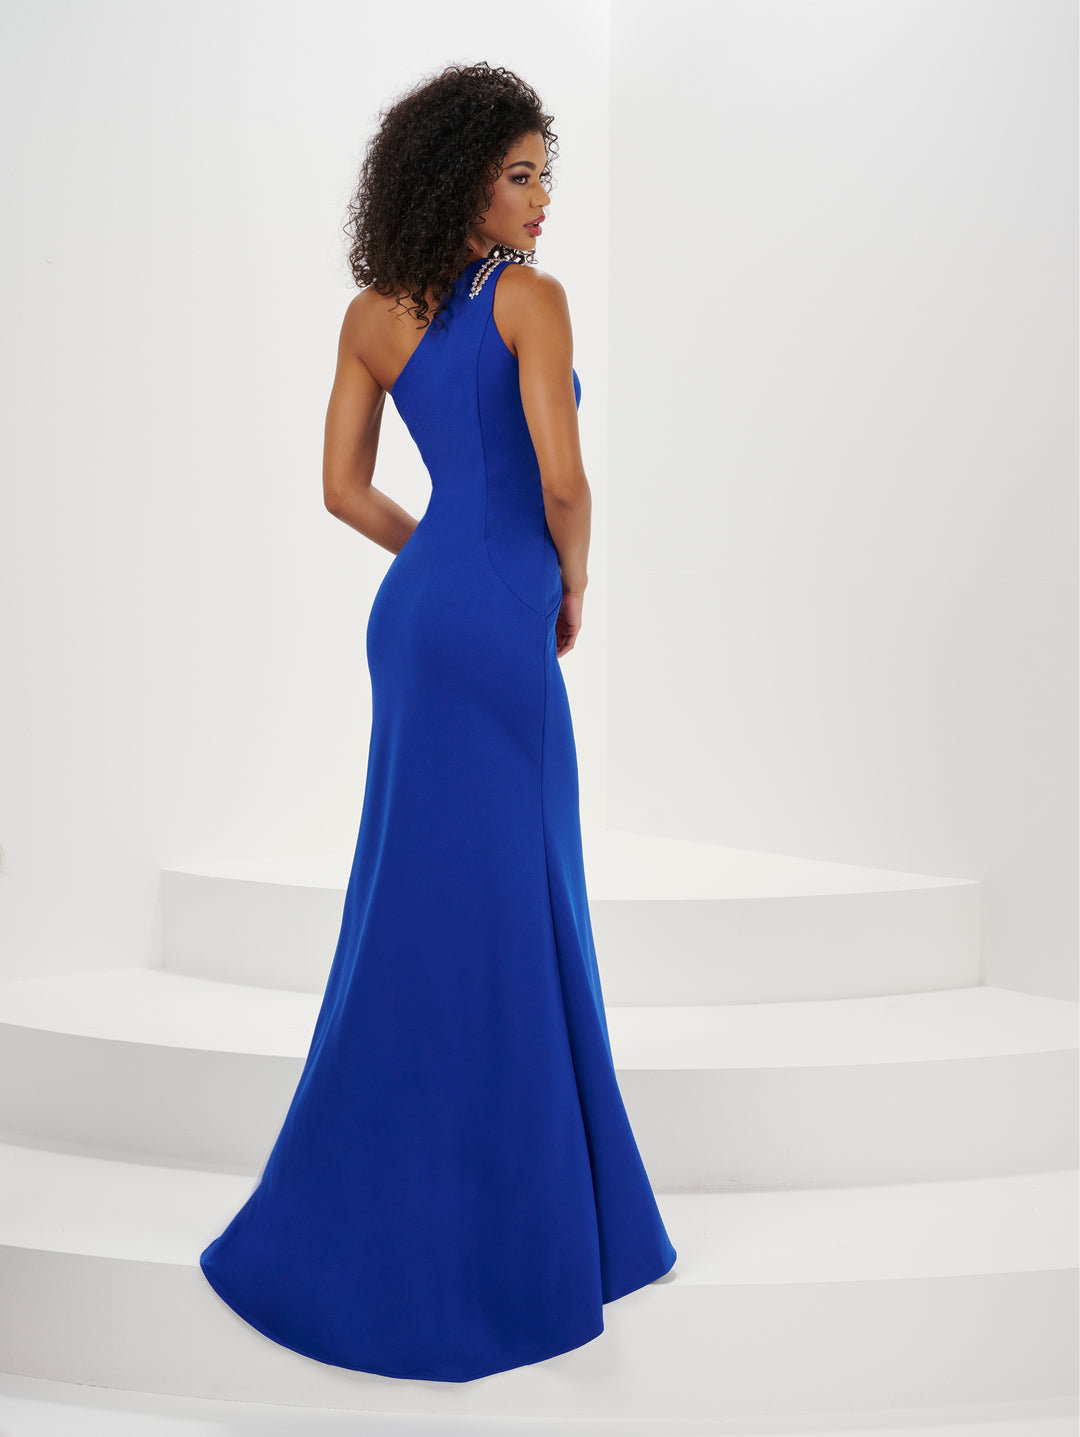 Beaded Jersey One Shoulder Slit Gown by Panoply 14176